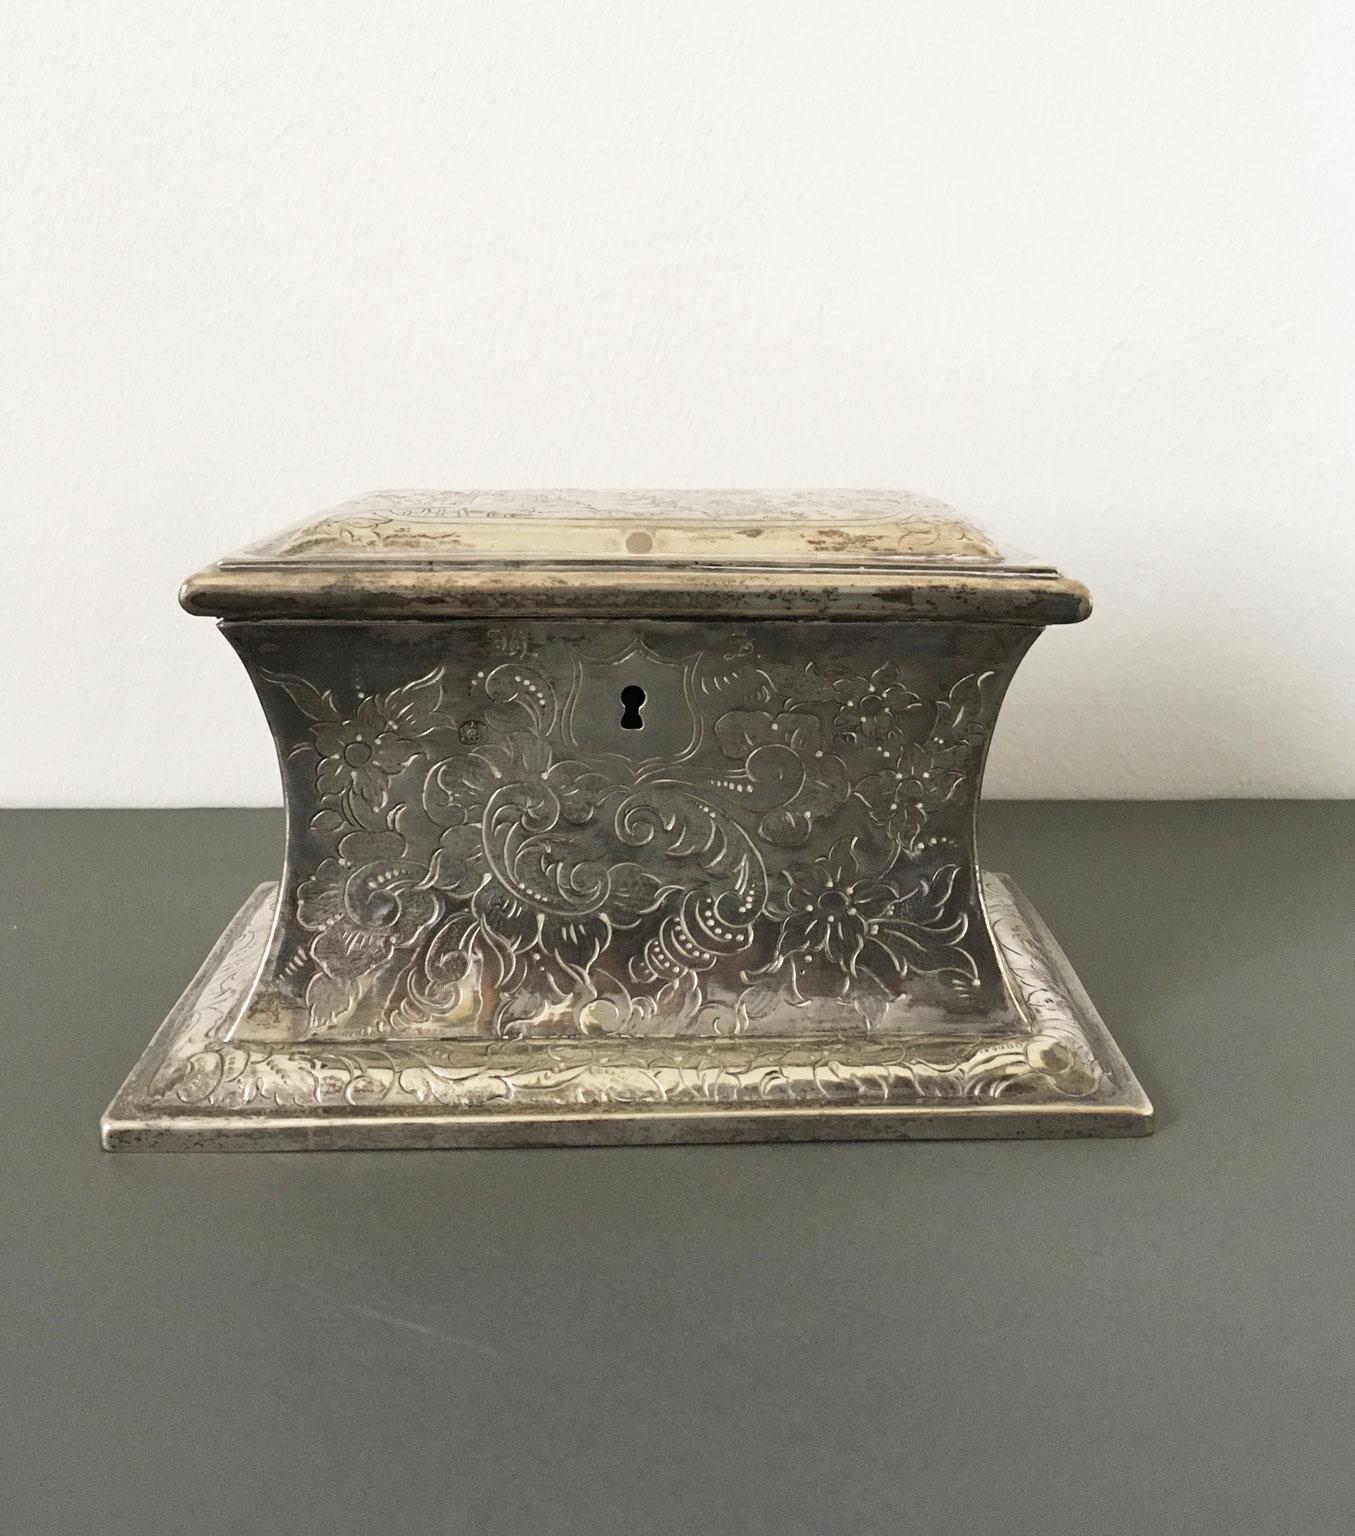 This fine sterling silver box is a piece of high craftmenship. All the surfaces are finely engraved with rich Baroque decor. It is a little jewel of handmade work.
It was a jewel box with its key. The key was lost but it is a piece of a great